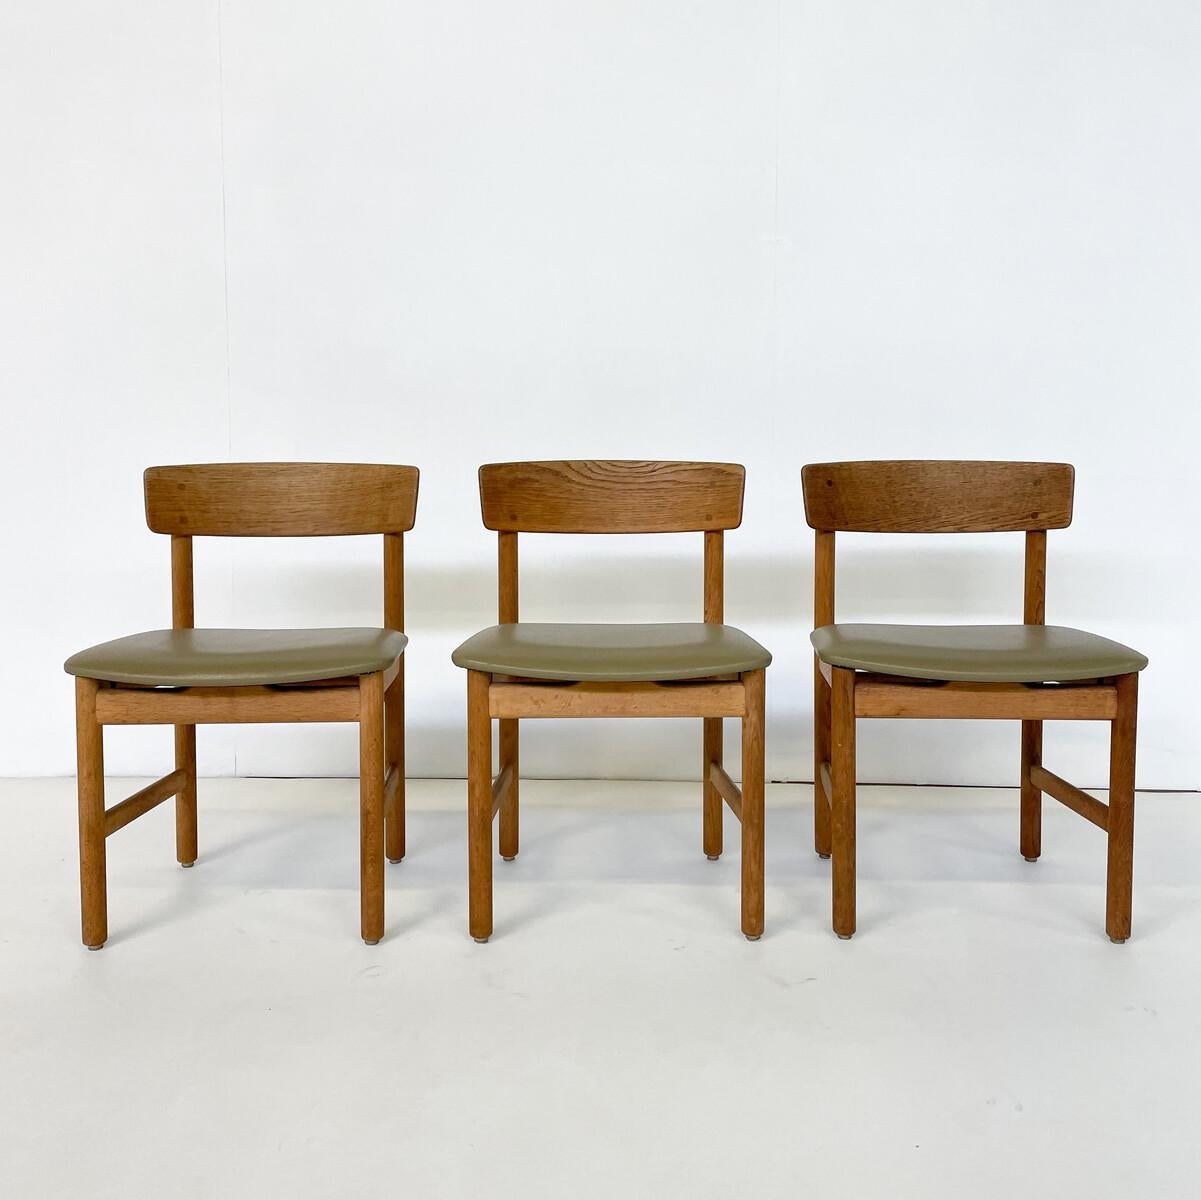 Set of 3 Dining Chairs Model 236 by Børge Mogensen, Denmark, 1950s For Sale 1